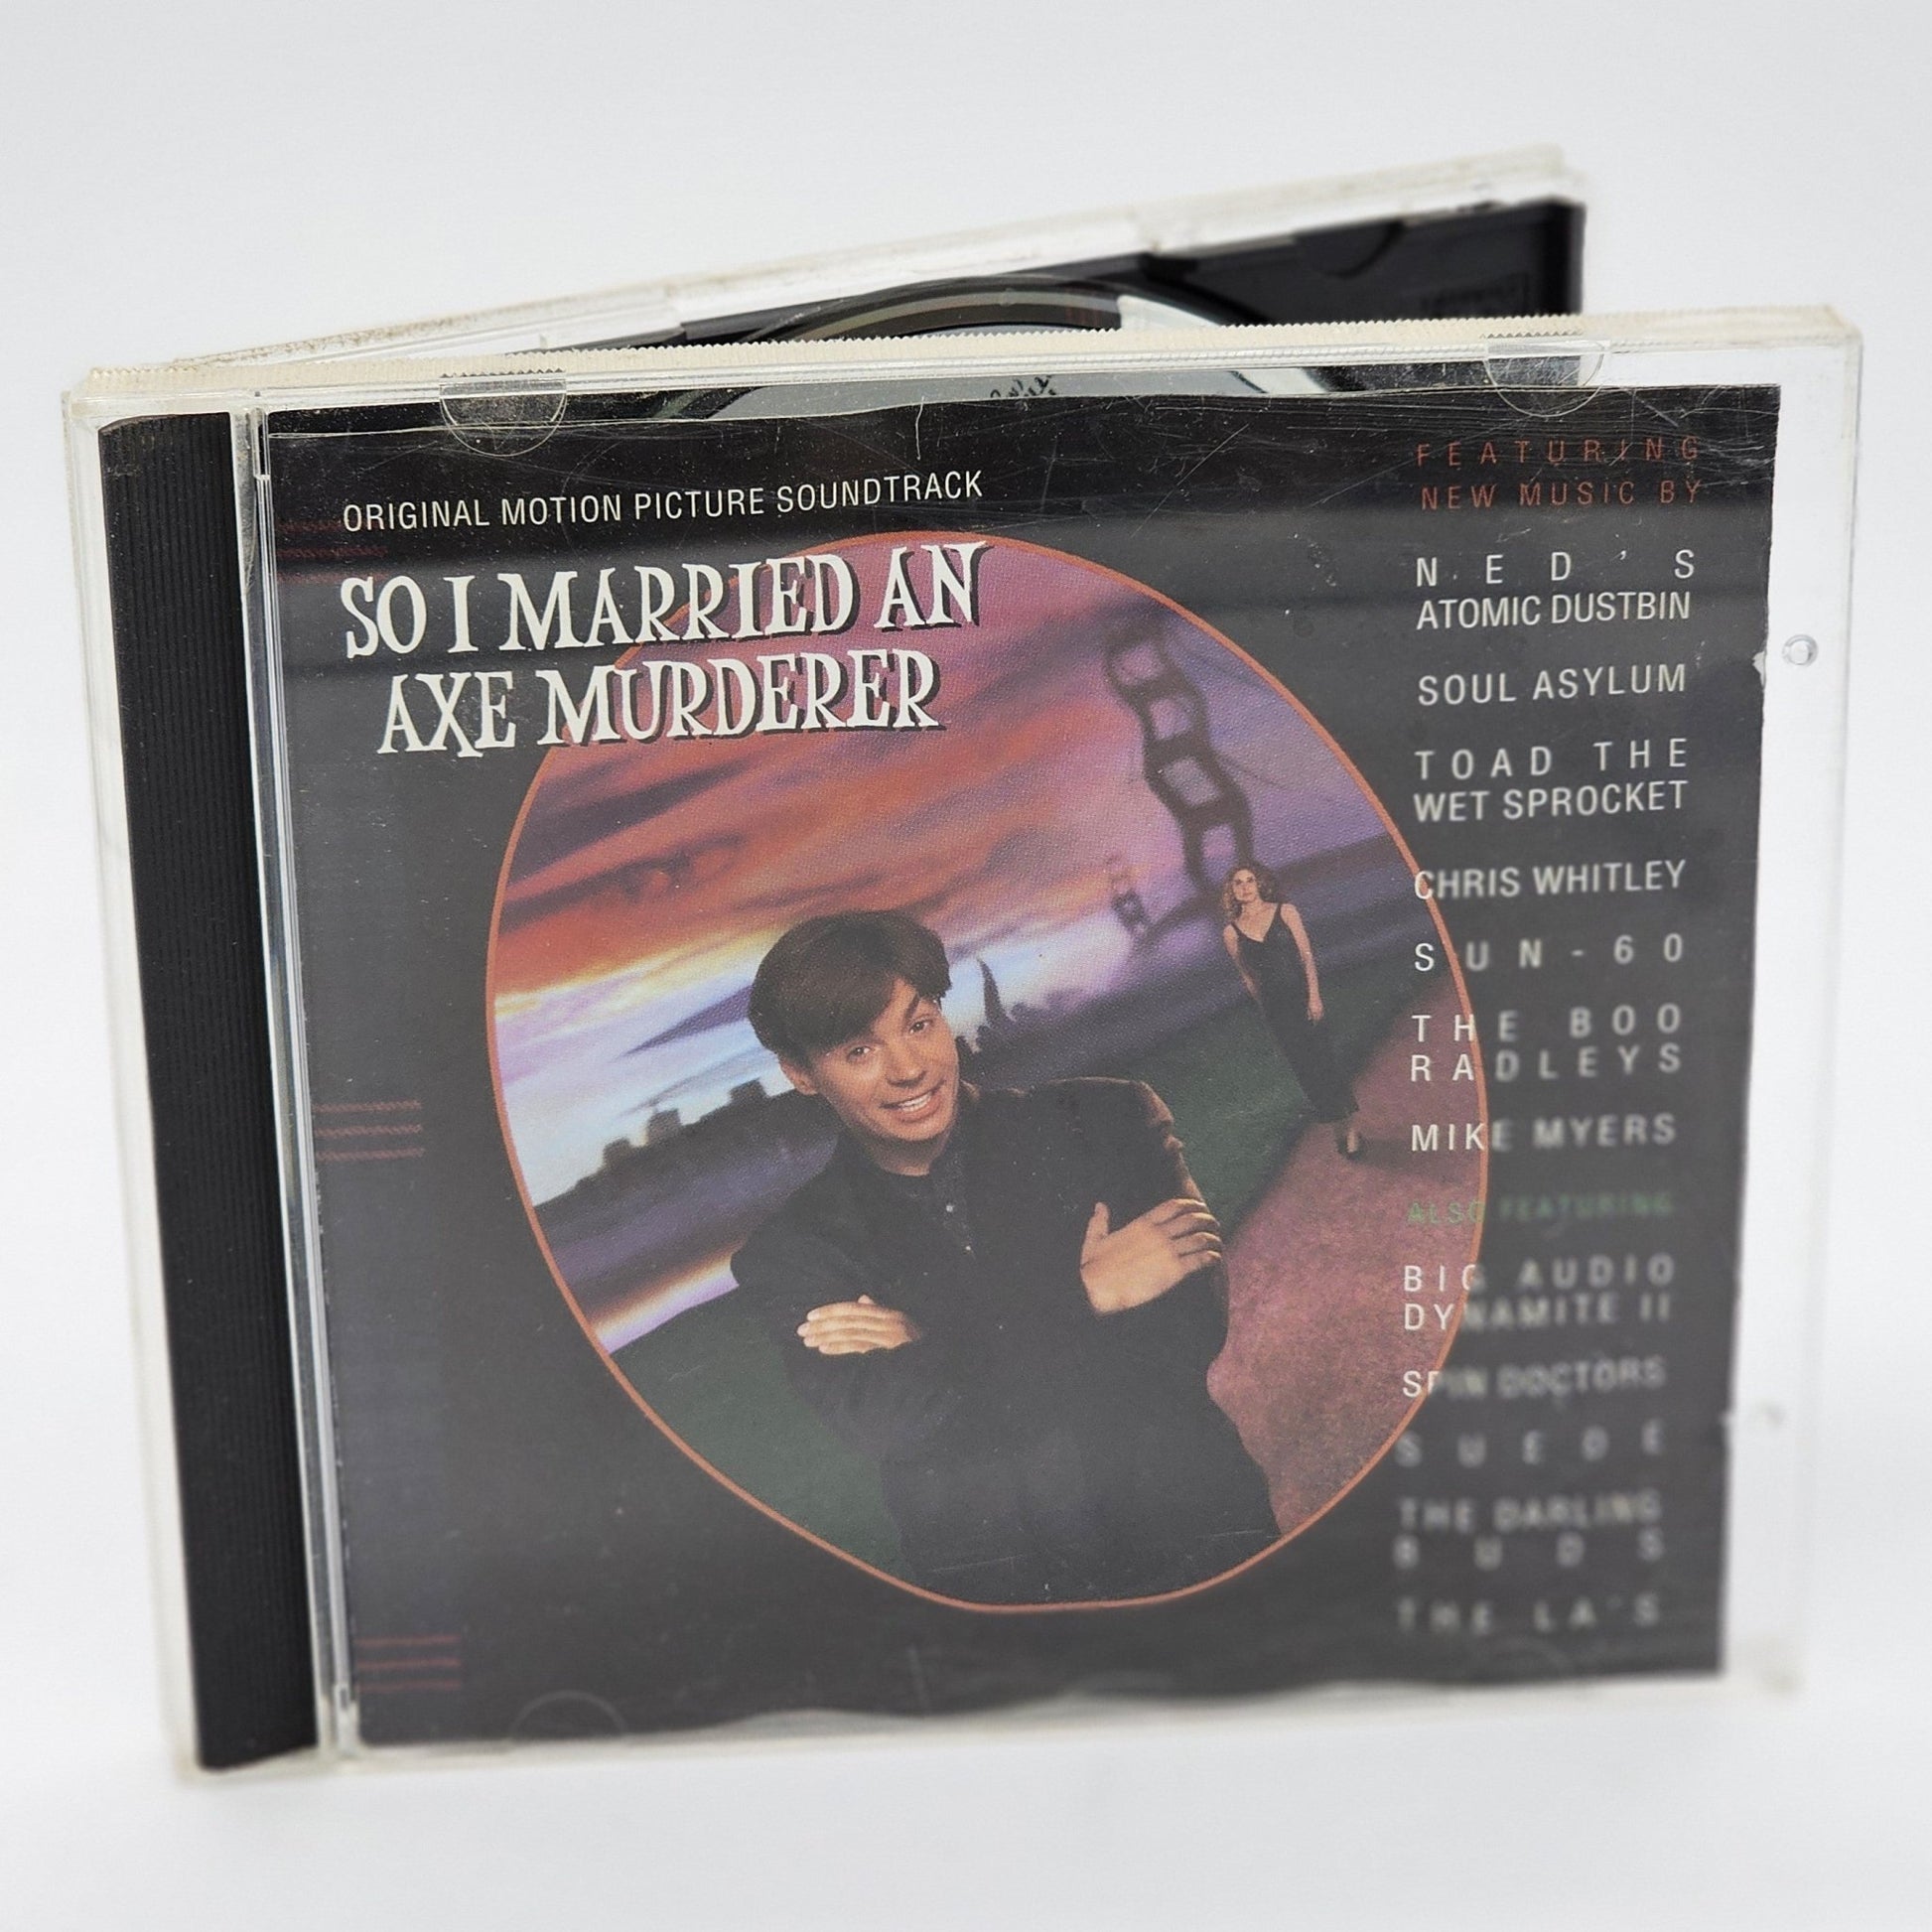 Columbia Records - So I Married An Axe Murderer | Original Motion Picture Soundtrack | CD - Compact Disc - Steady Bunny Shop